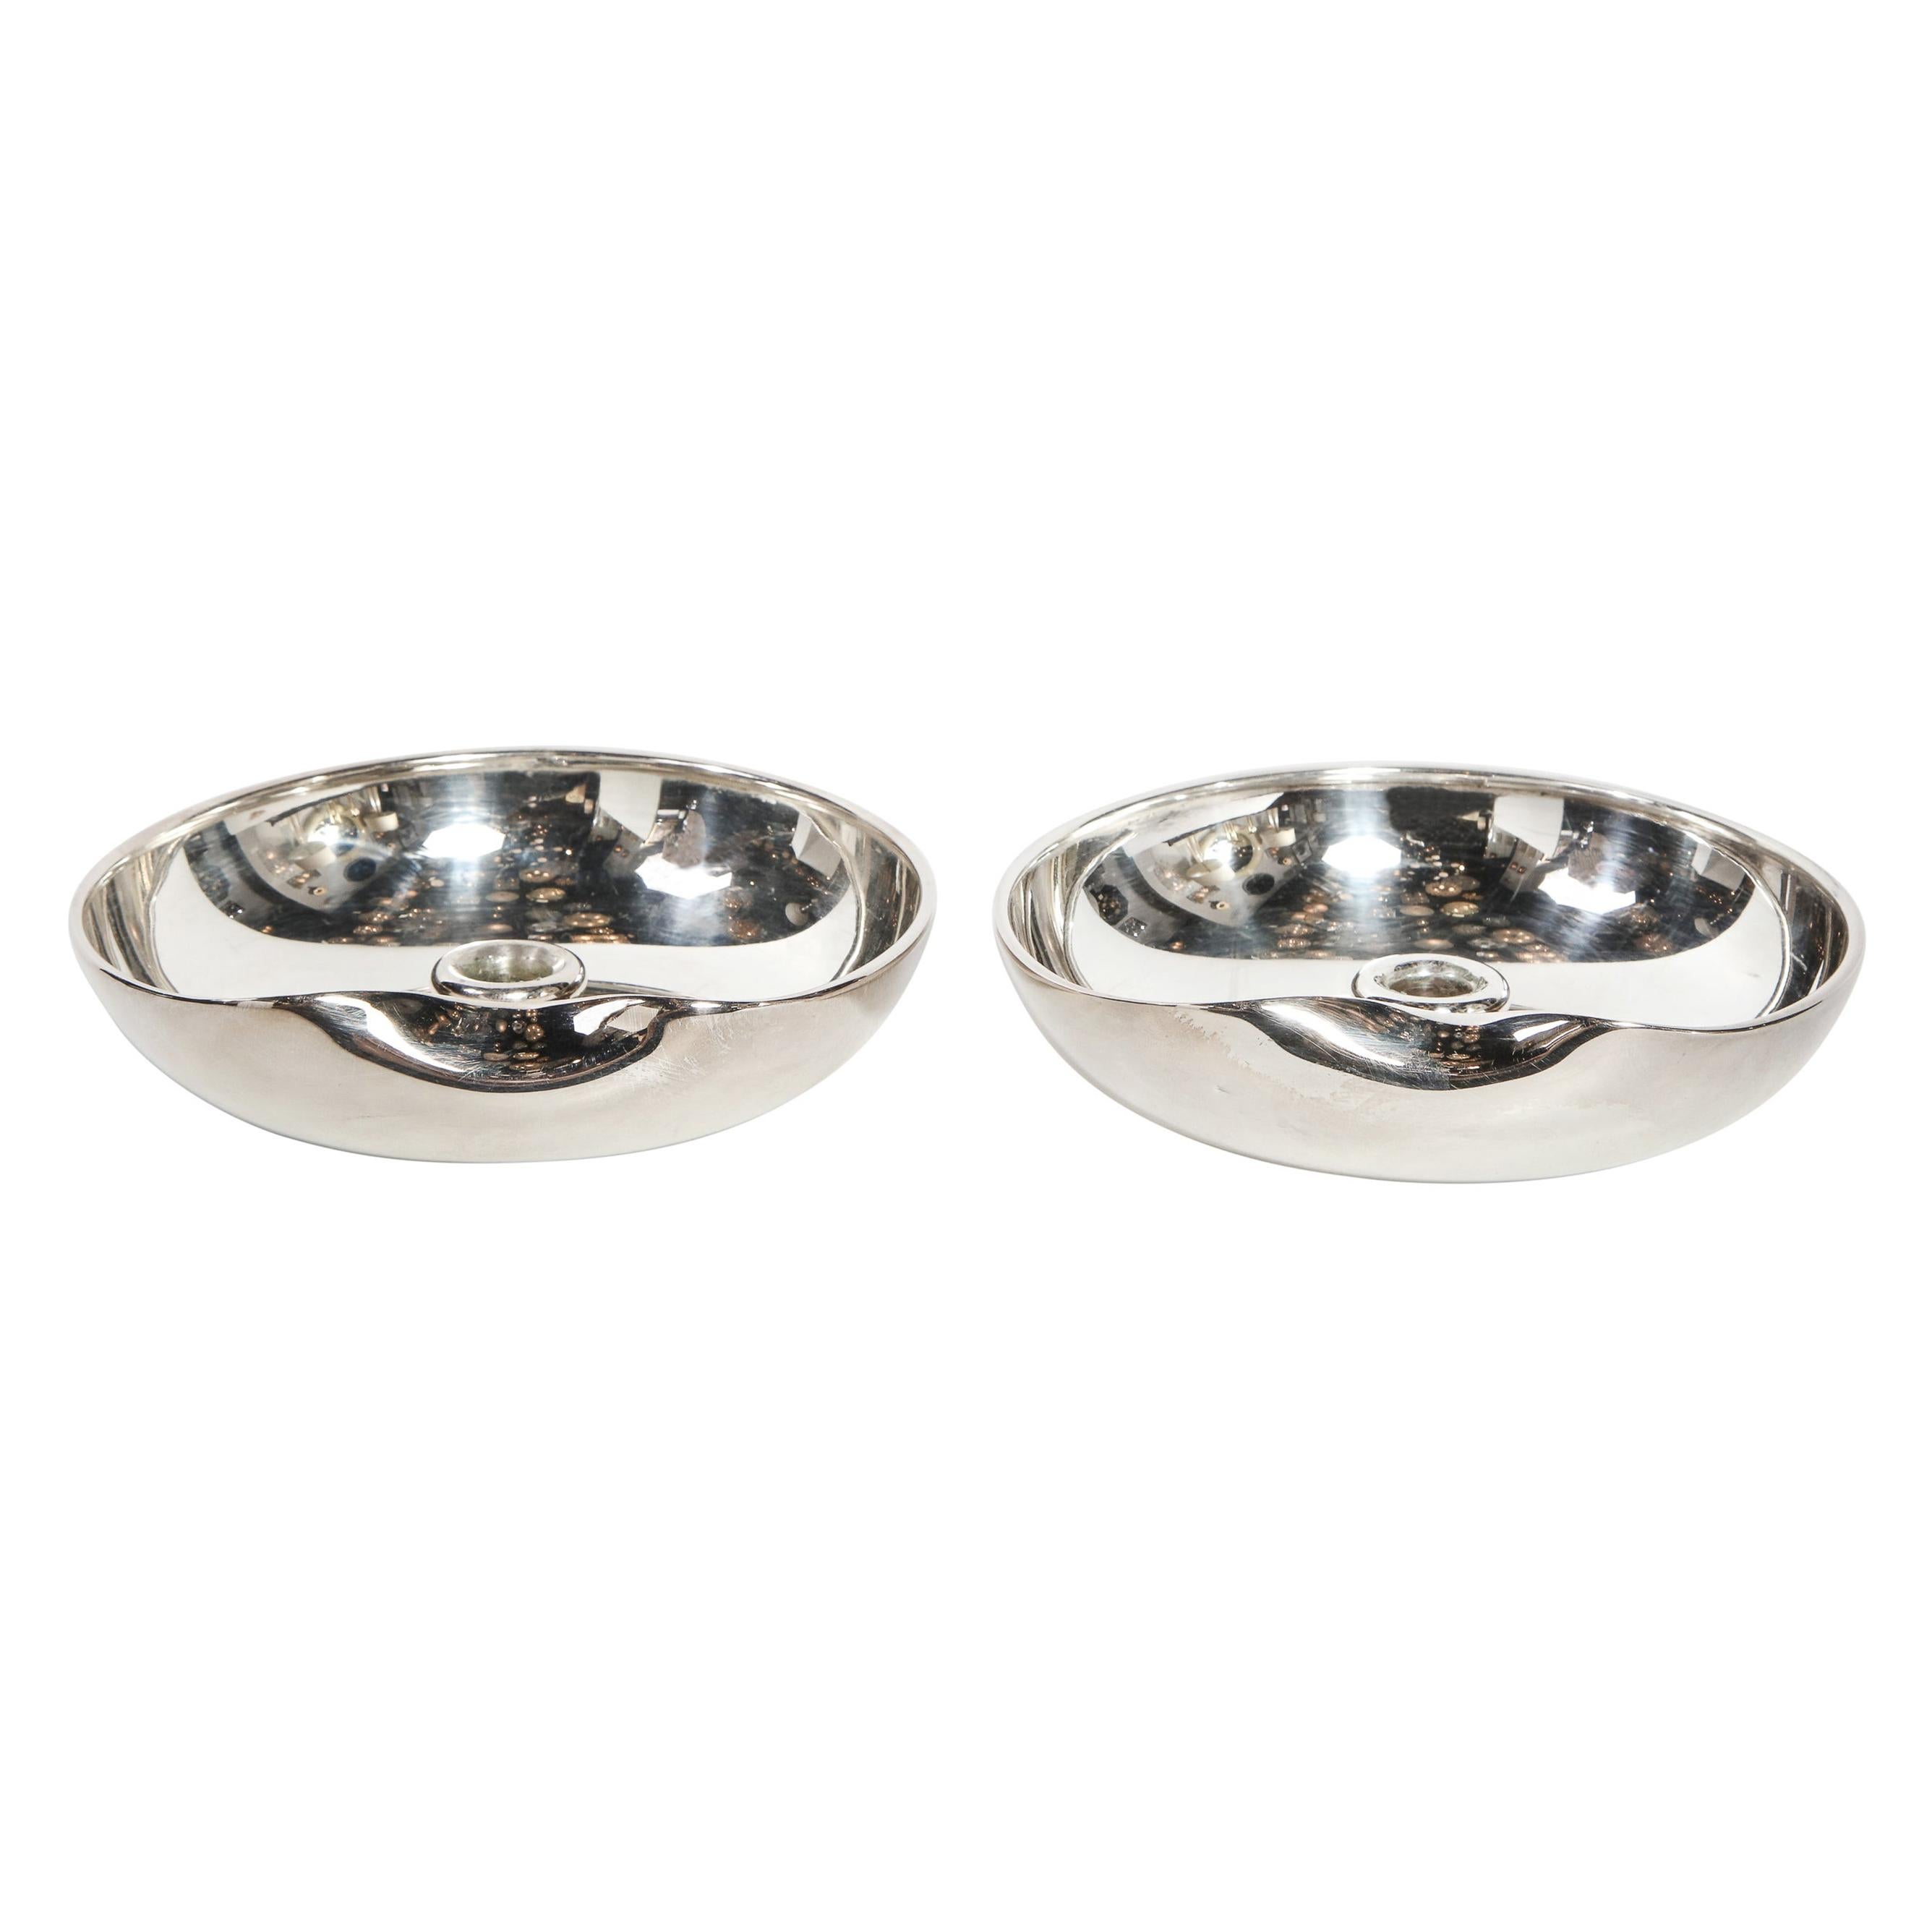 Pair of Modernist Sterling Candle Holders by Elsa Peretti for Tiffany & Co.